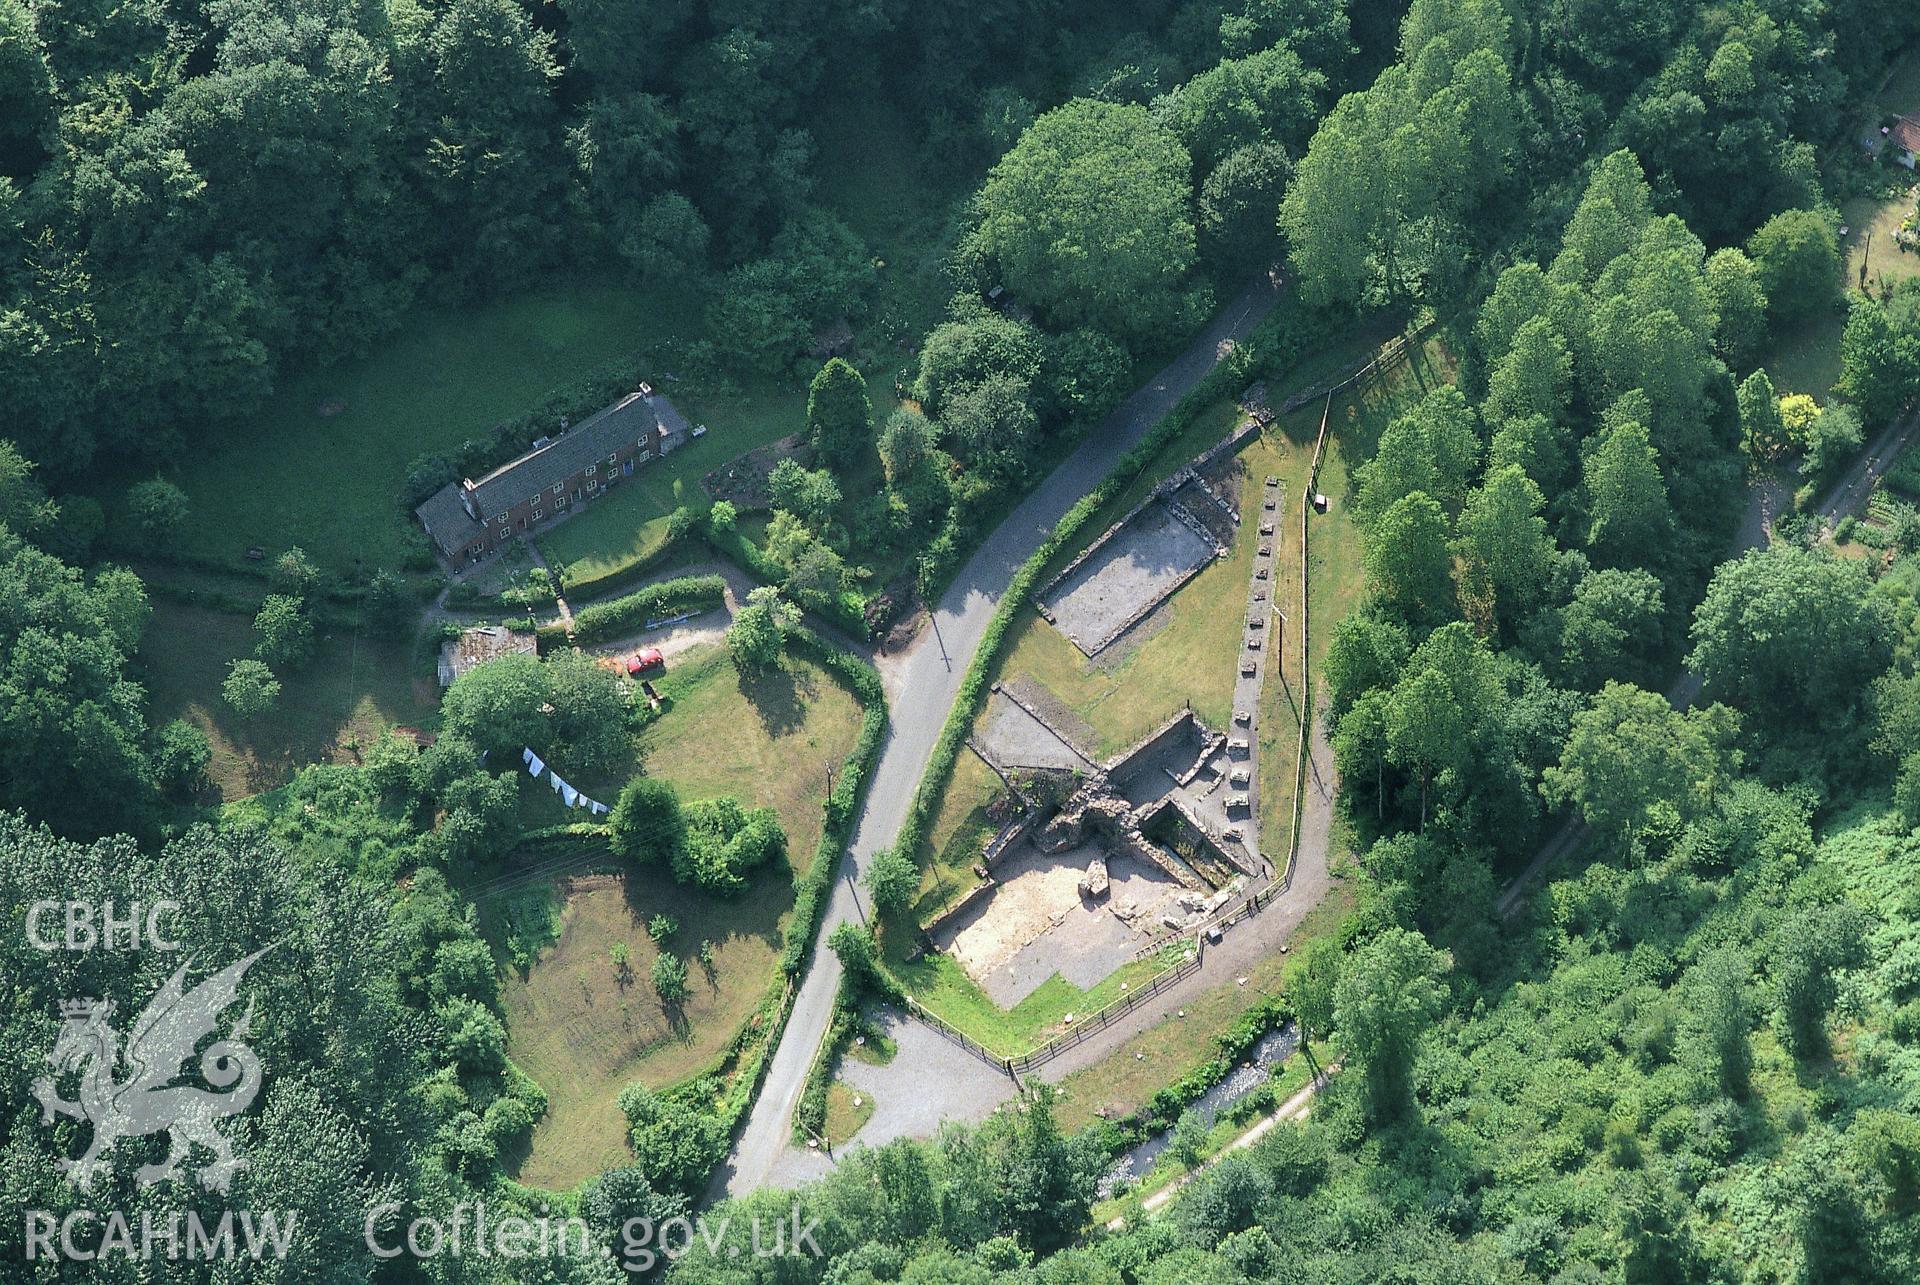 RCAHMW colour slide oblique aerial photograph of Blast Furnace, Tintern, taken by C.R. Musson, 18/07/94